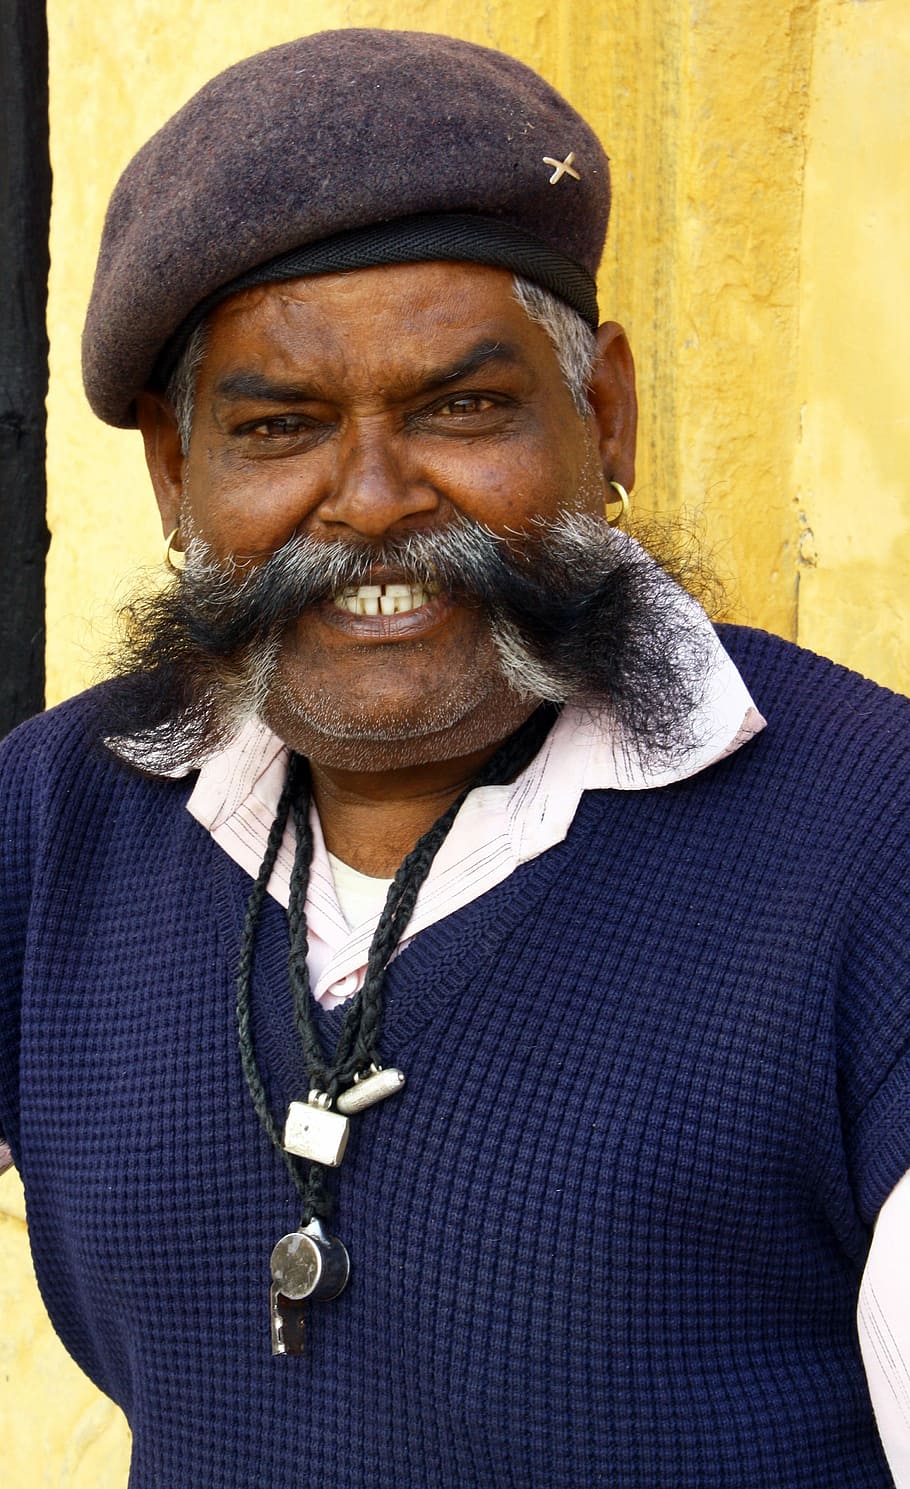 Mustache, Indian, Man, Portrait, Pirate, indian man, character, funny, guard, whistle